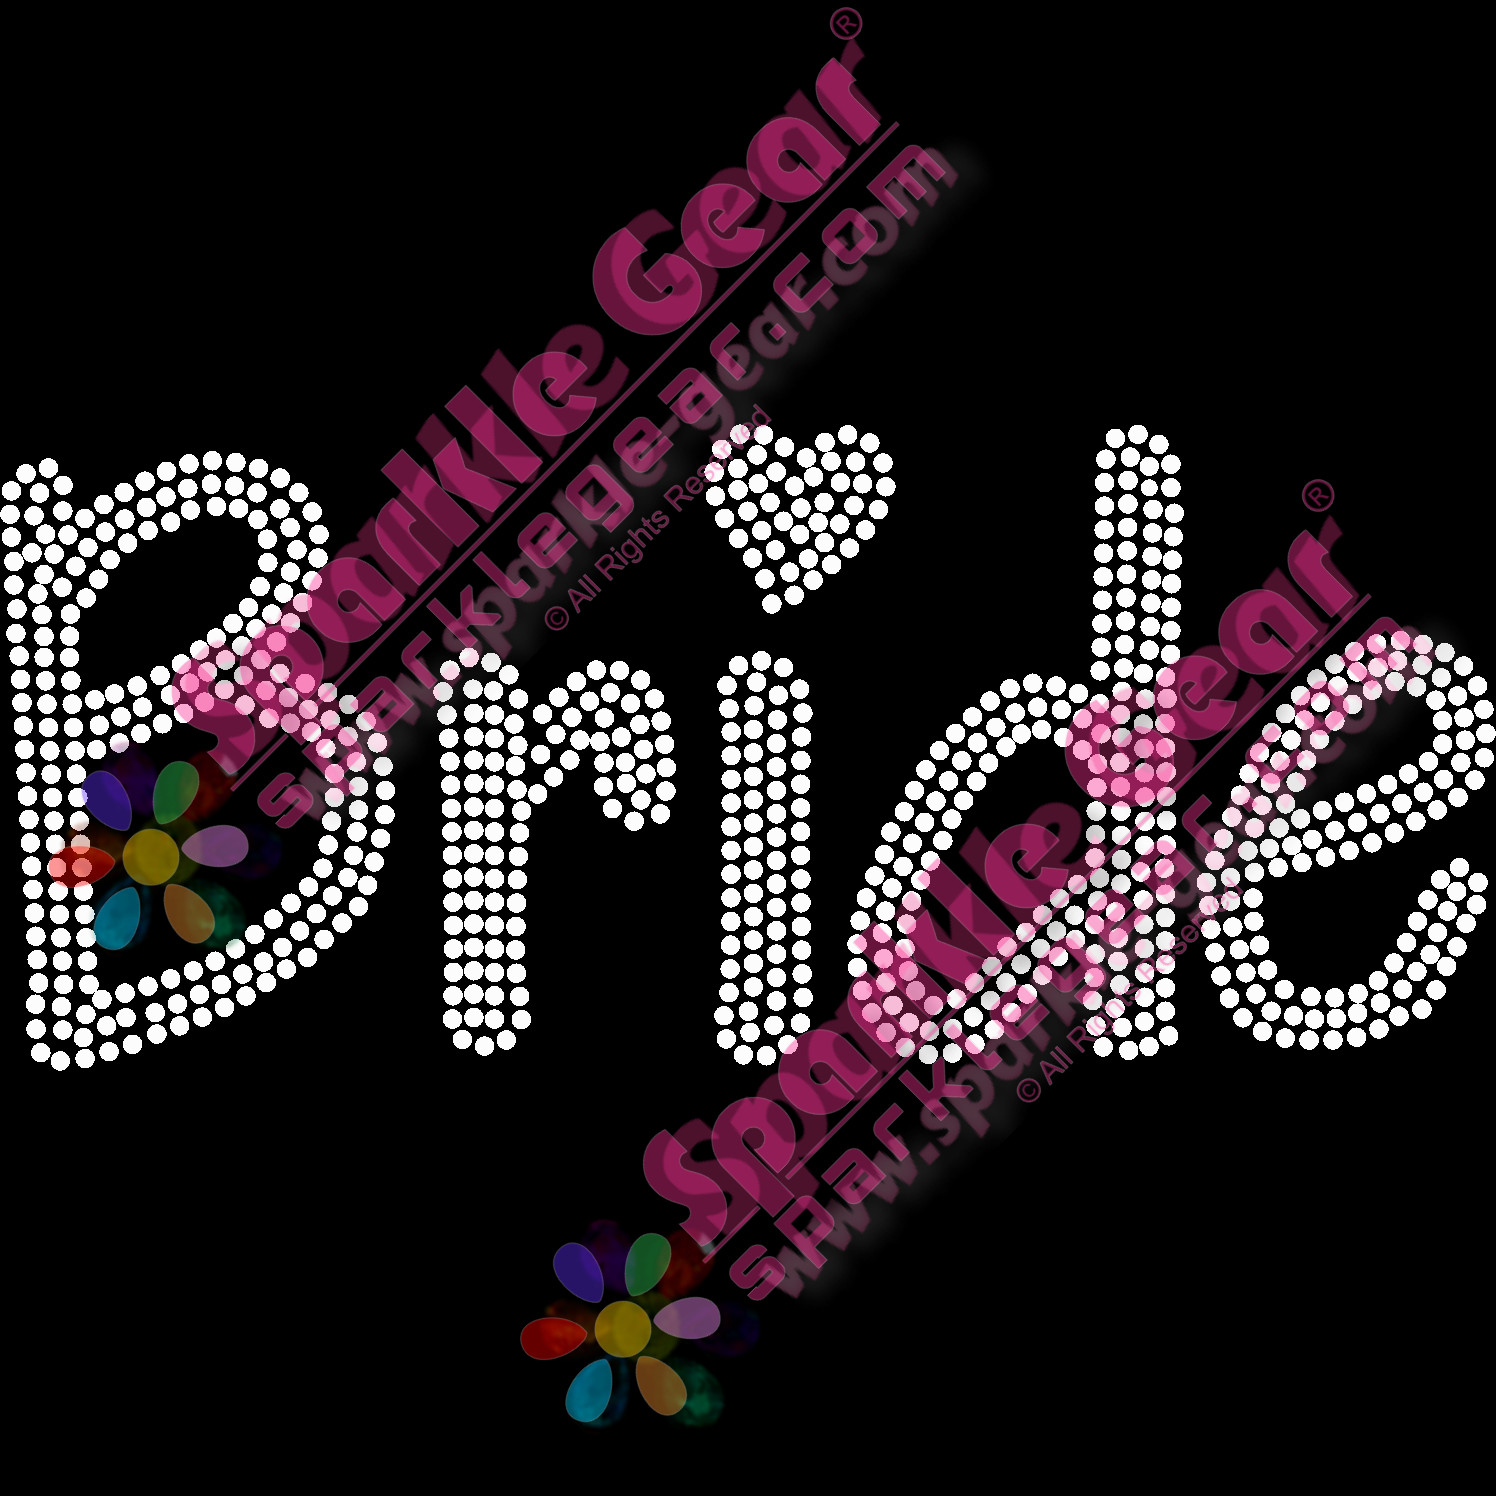 Bride With a Heart - Bling Transfers by Sparkle Gear